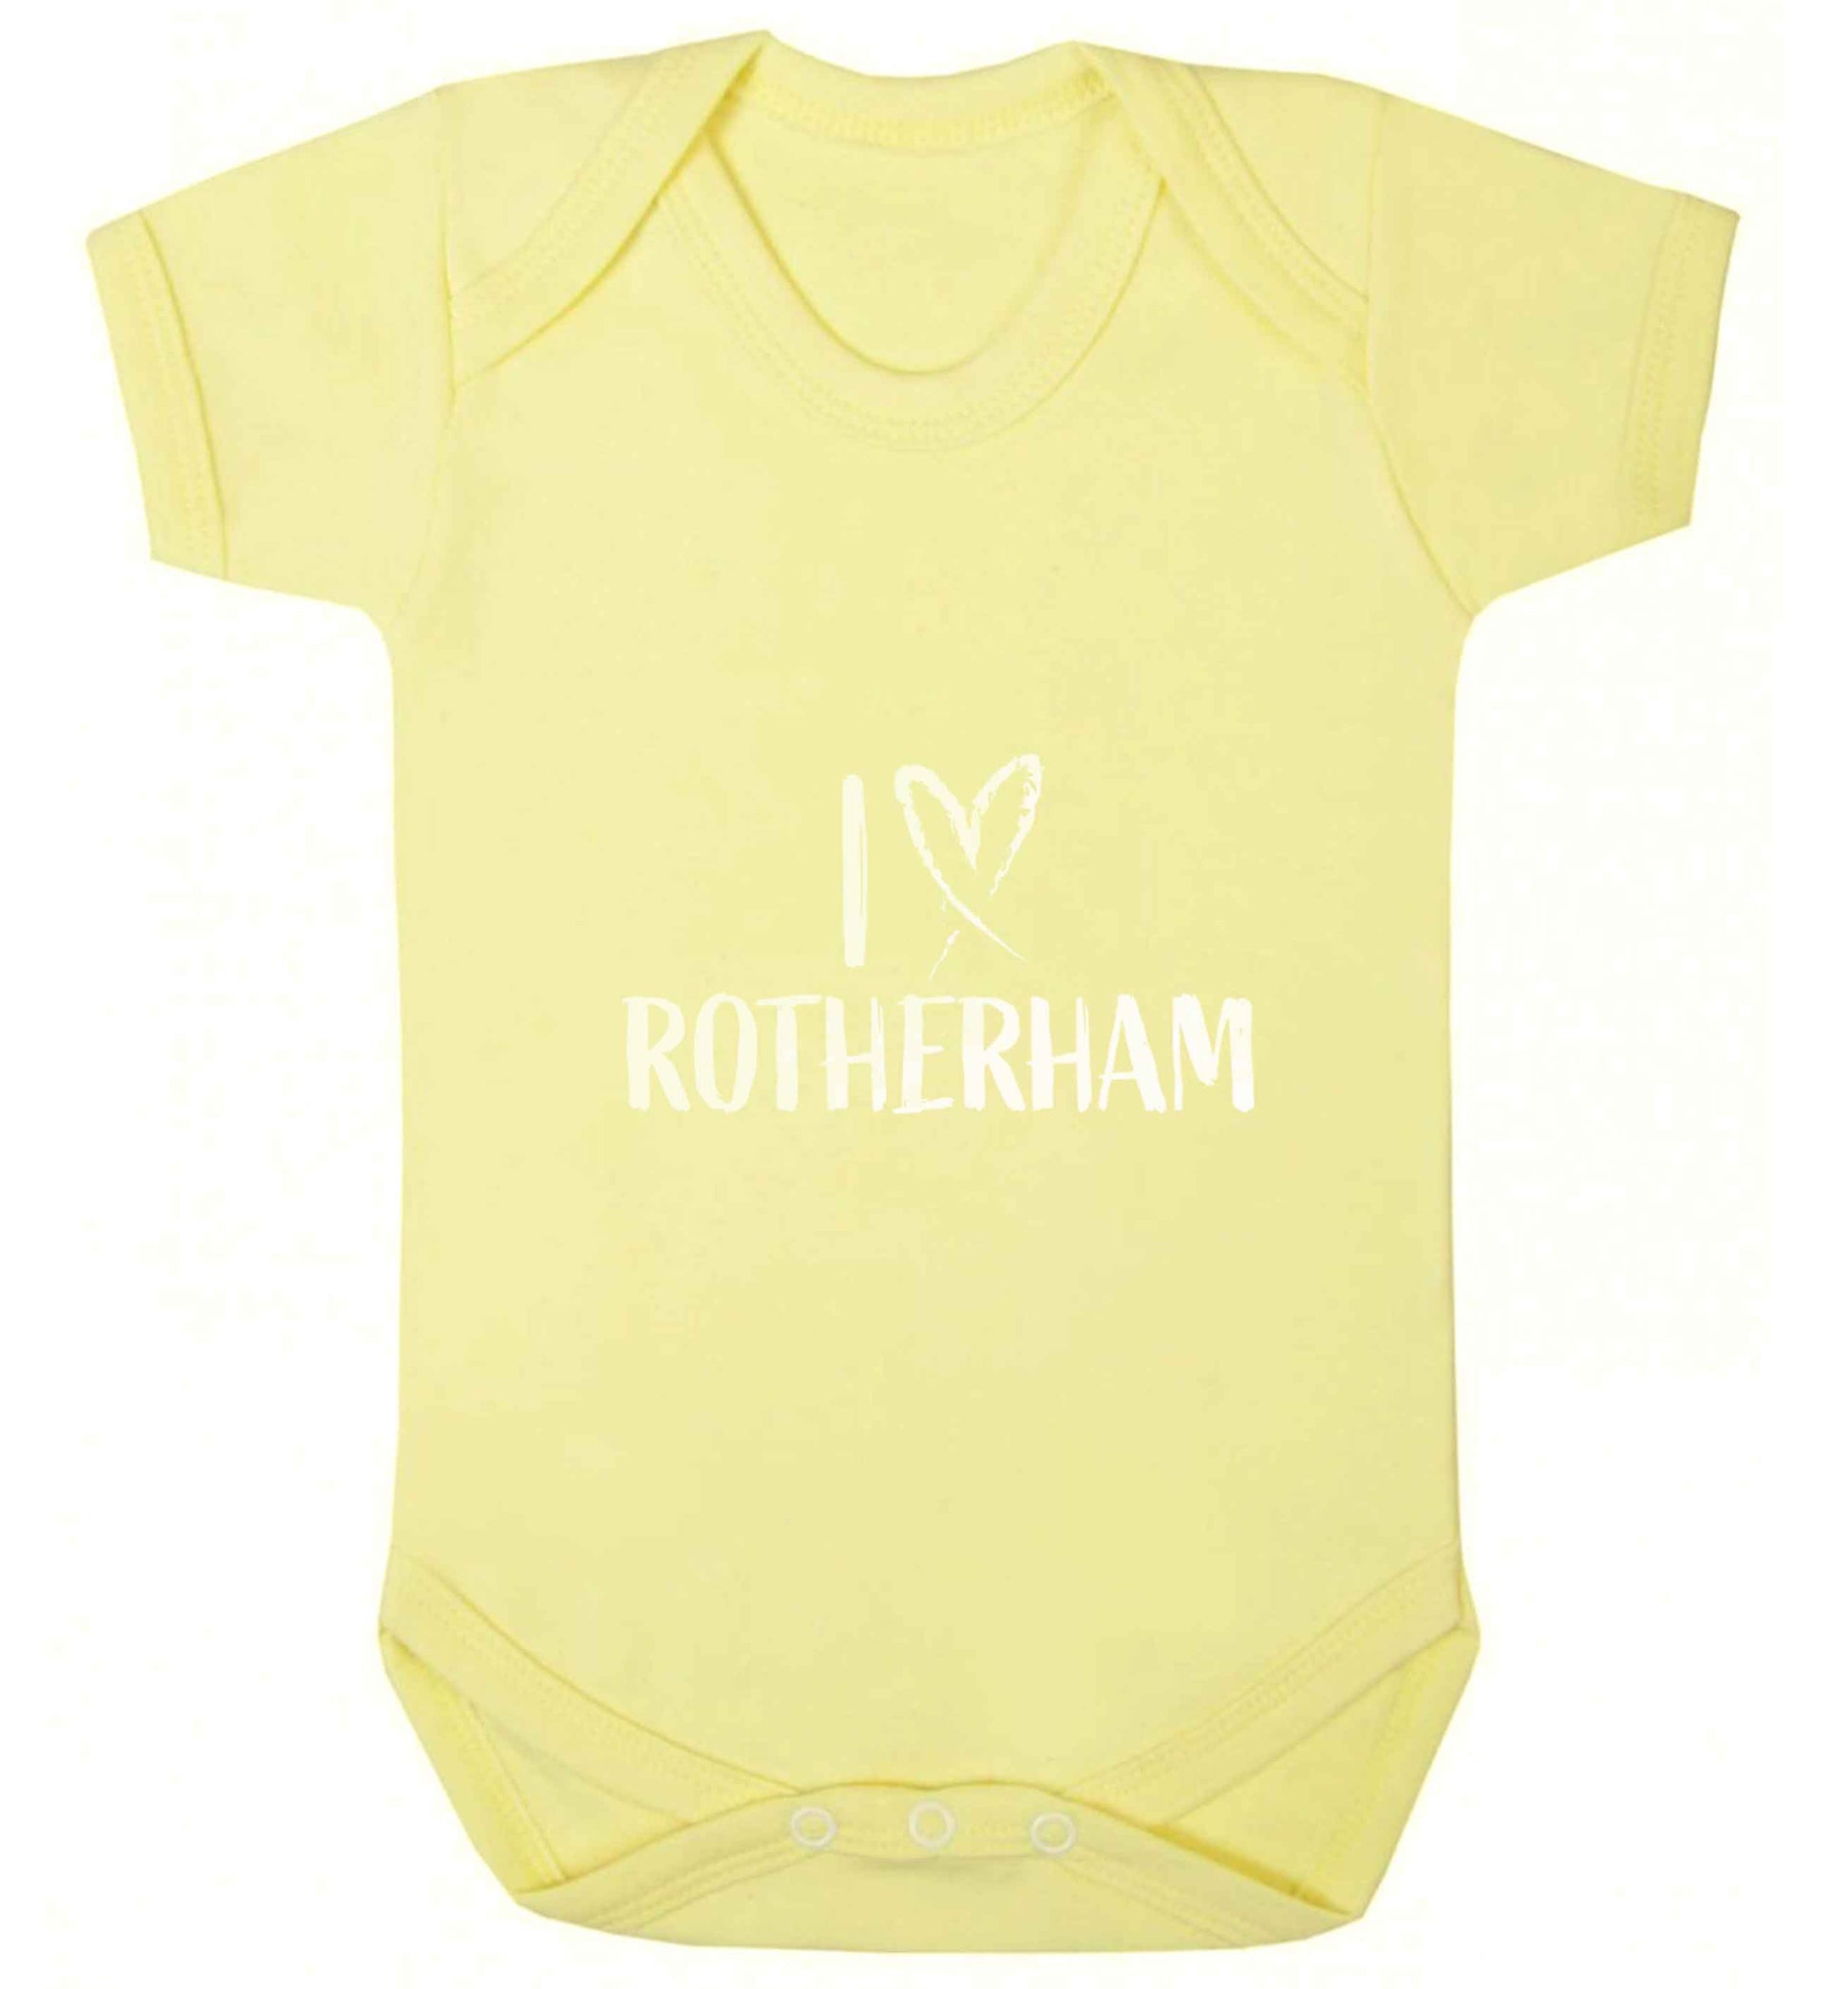 I love Rotherham baby vest pale yellow 18-24 months